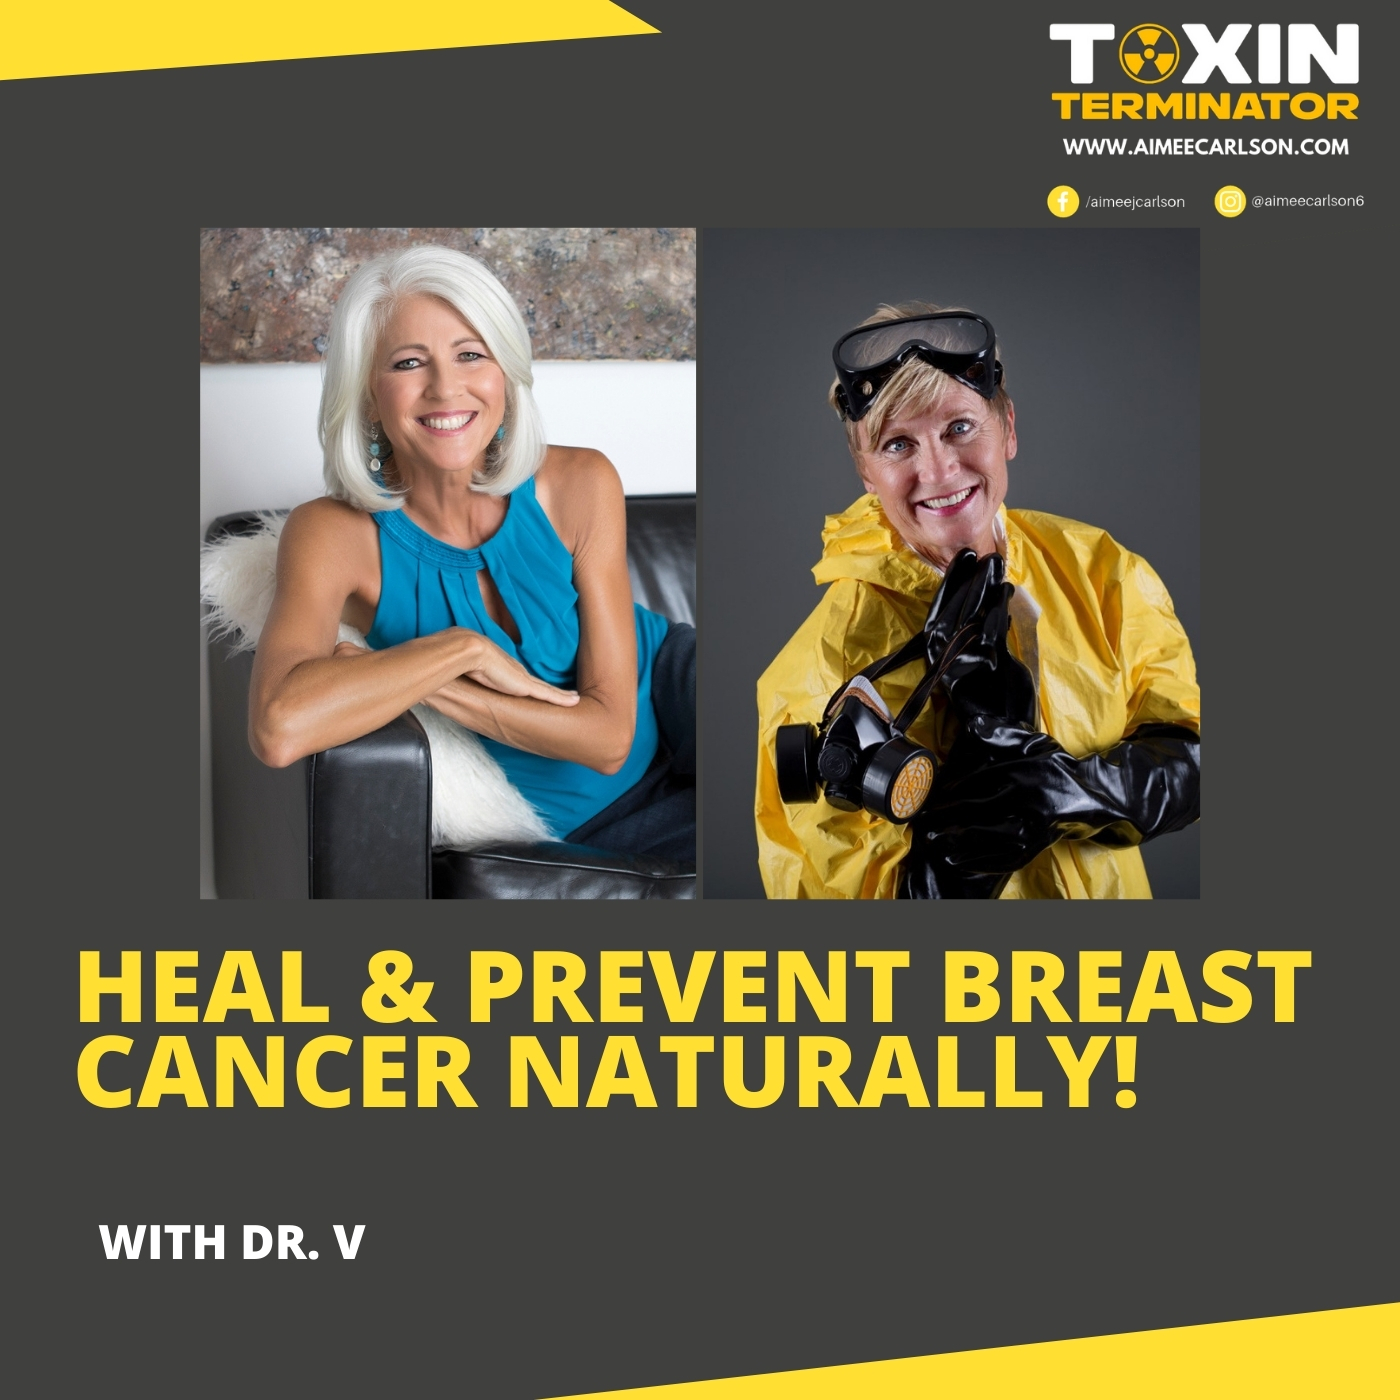 Heal & Prevent Breast Cancer Naturally with Dr. V